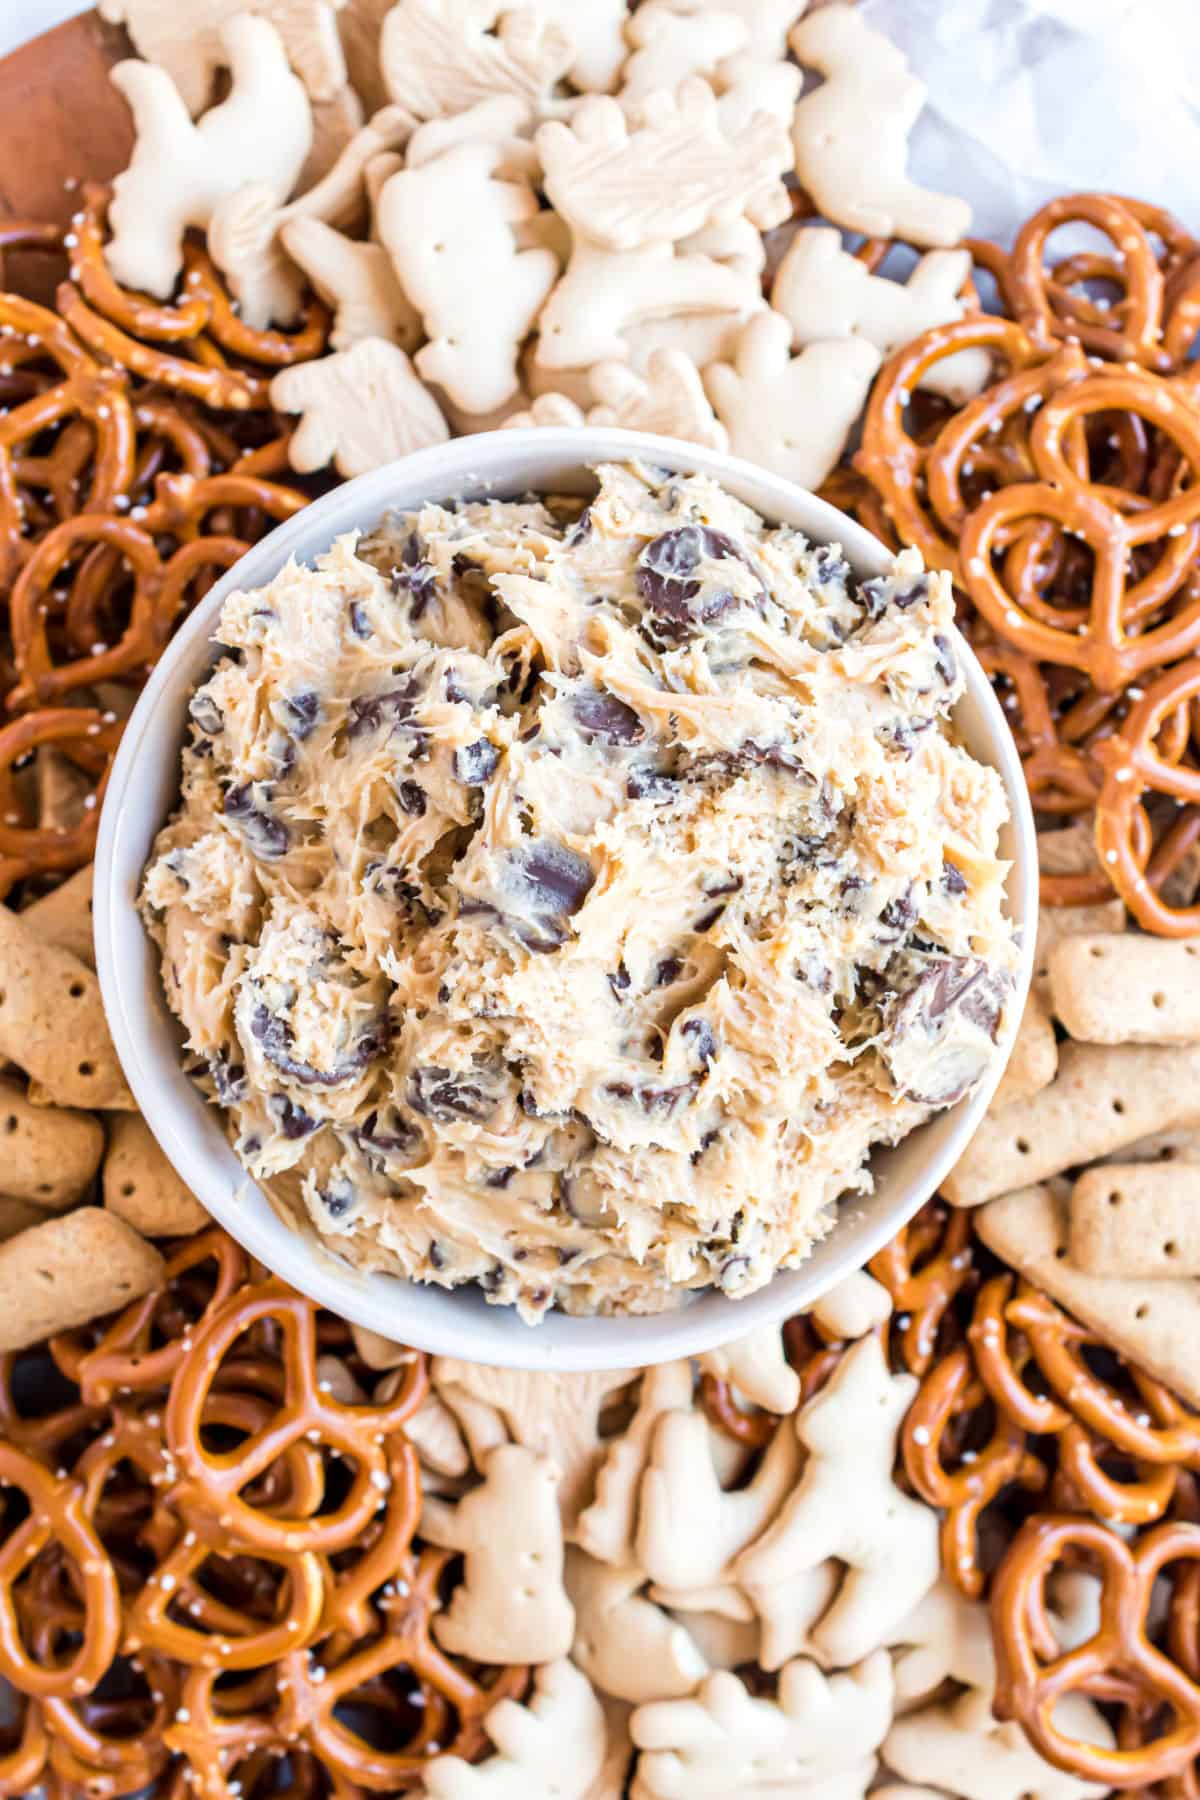 Peanut butter cookie dough dip in a bowl served with pretzels and animal crackers.